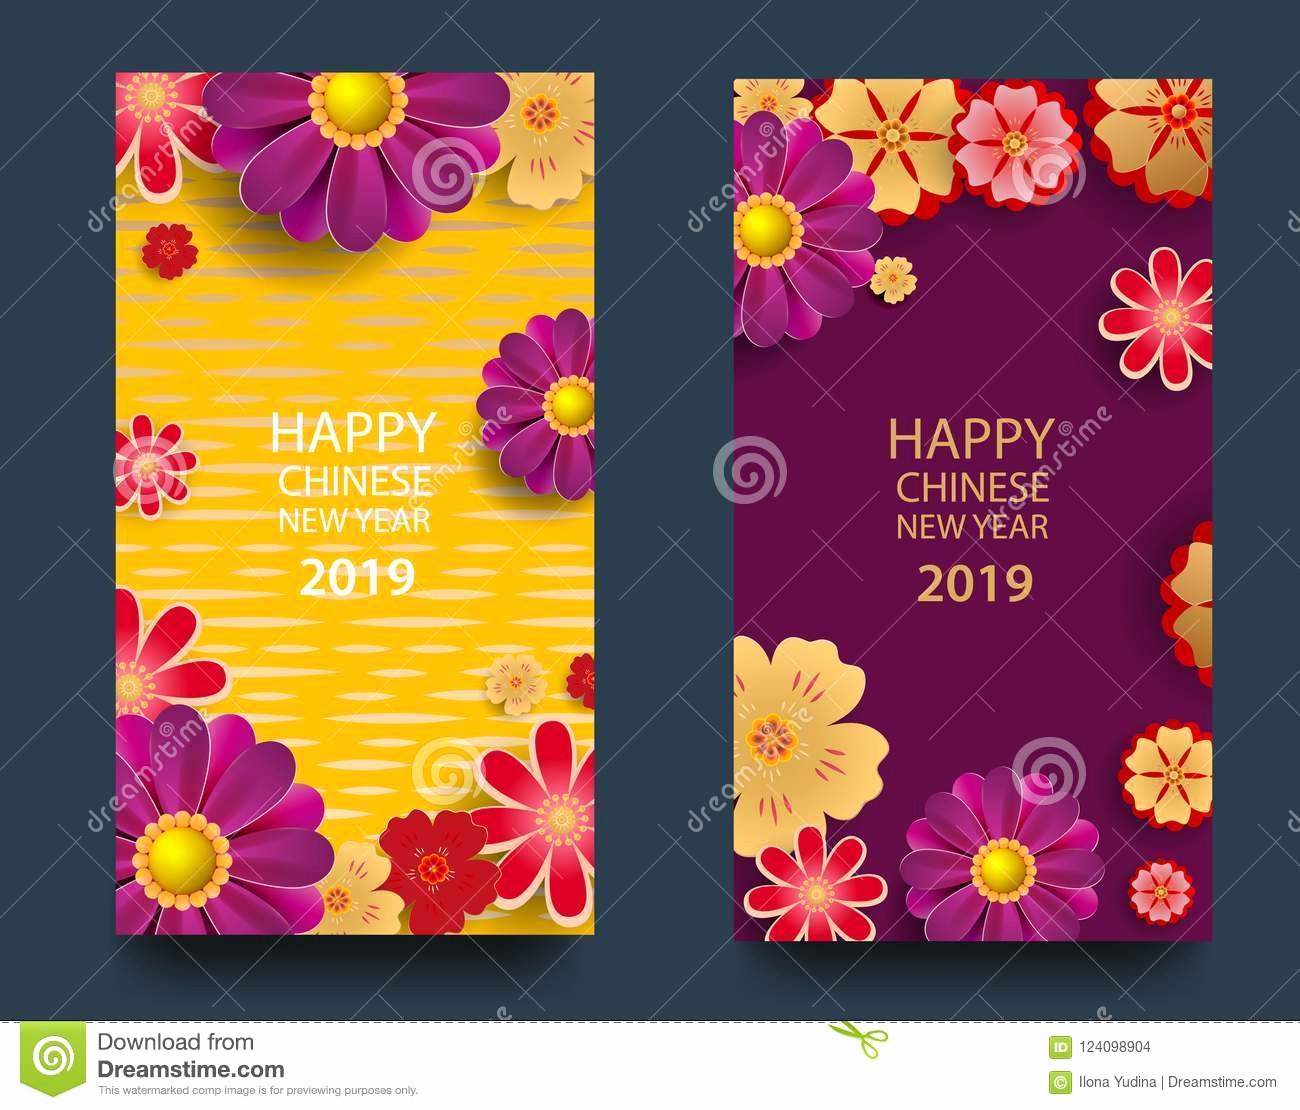 New Years Invitation 2019 Inspirational Happy New Year 2019 Chinese New Year Greeting Card Poster